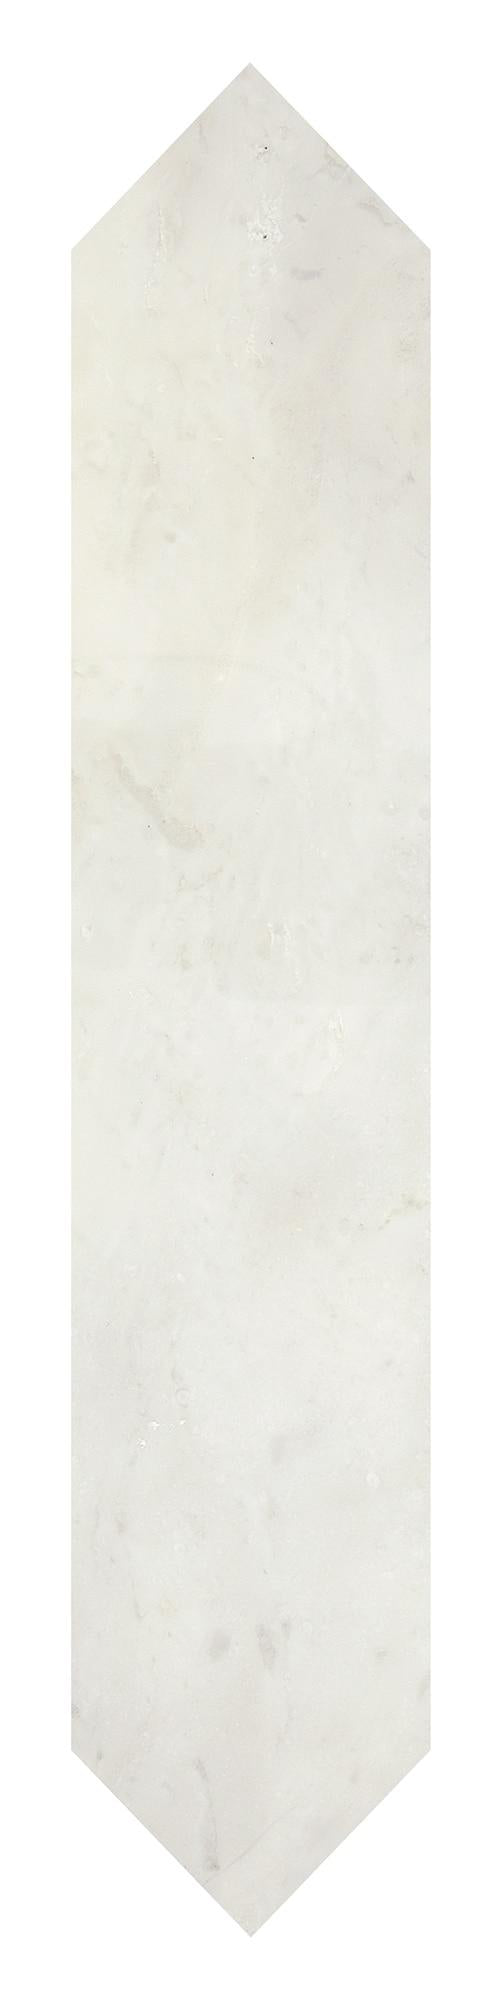 Stormy Mist Marble Tile 3x15 Polished   3/8 inch